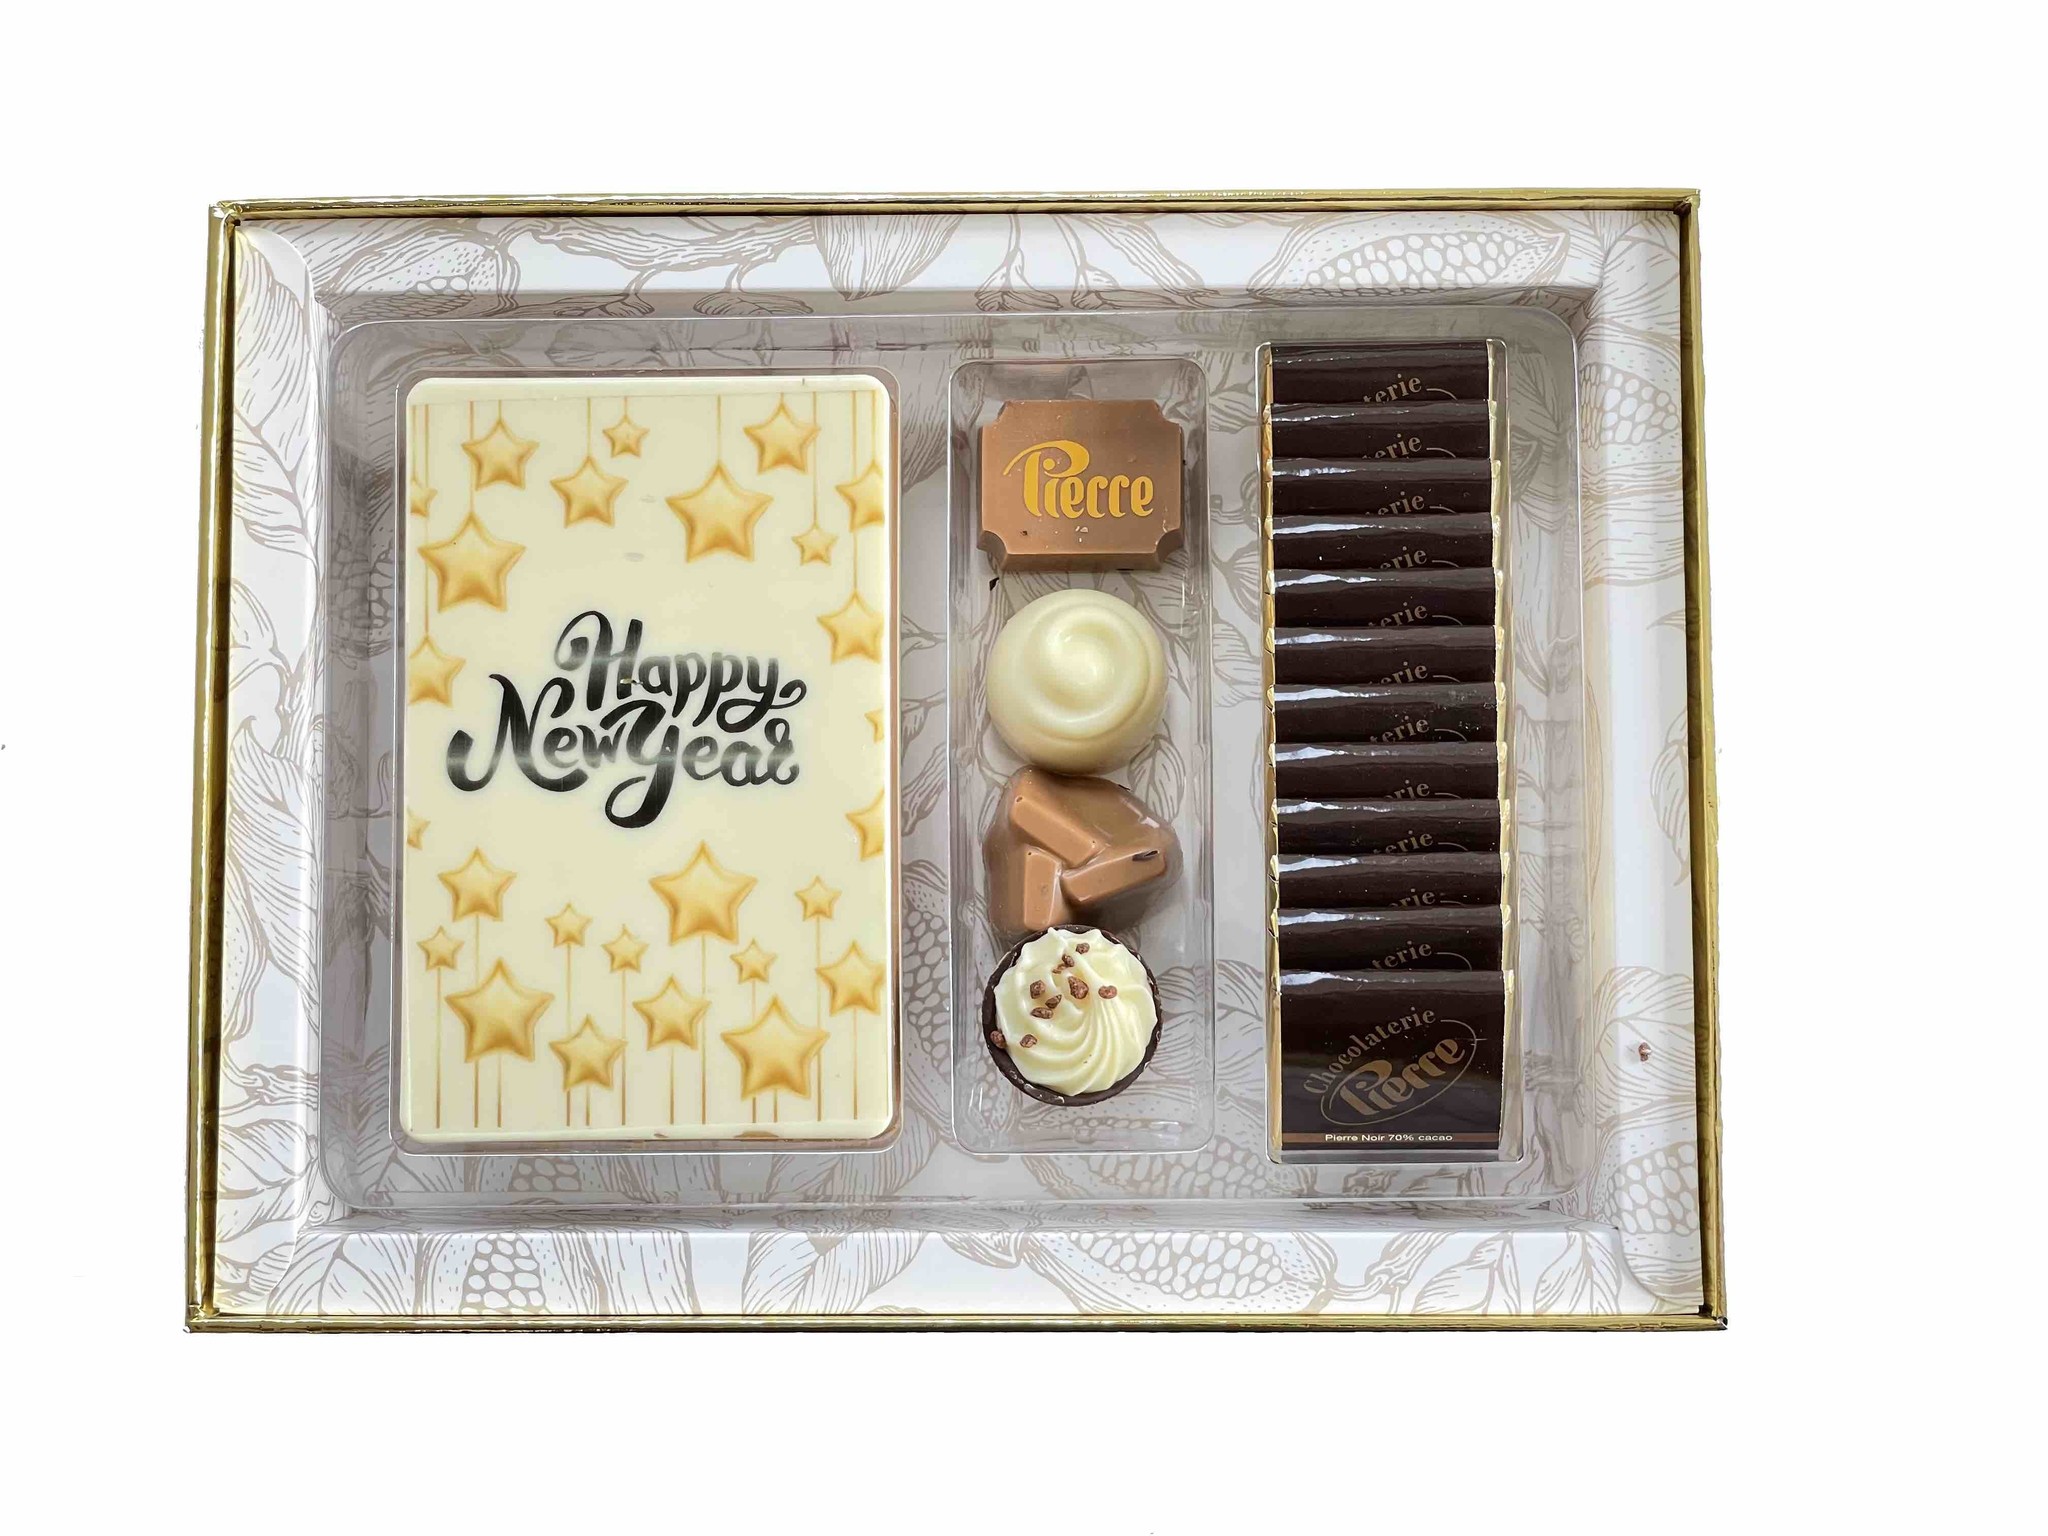 Luxe Happy New Year-box met bonbons, chocolade tablet en napolitains